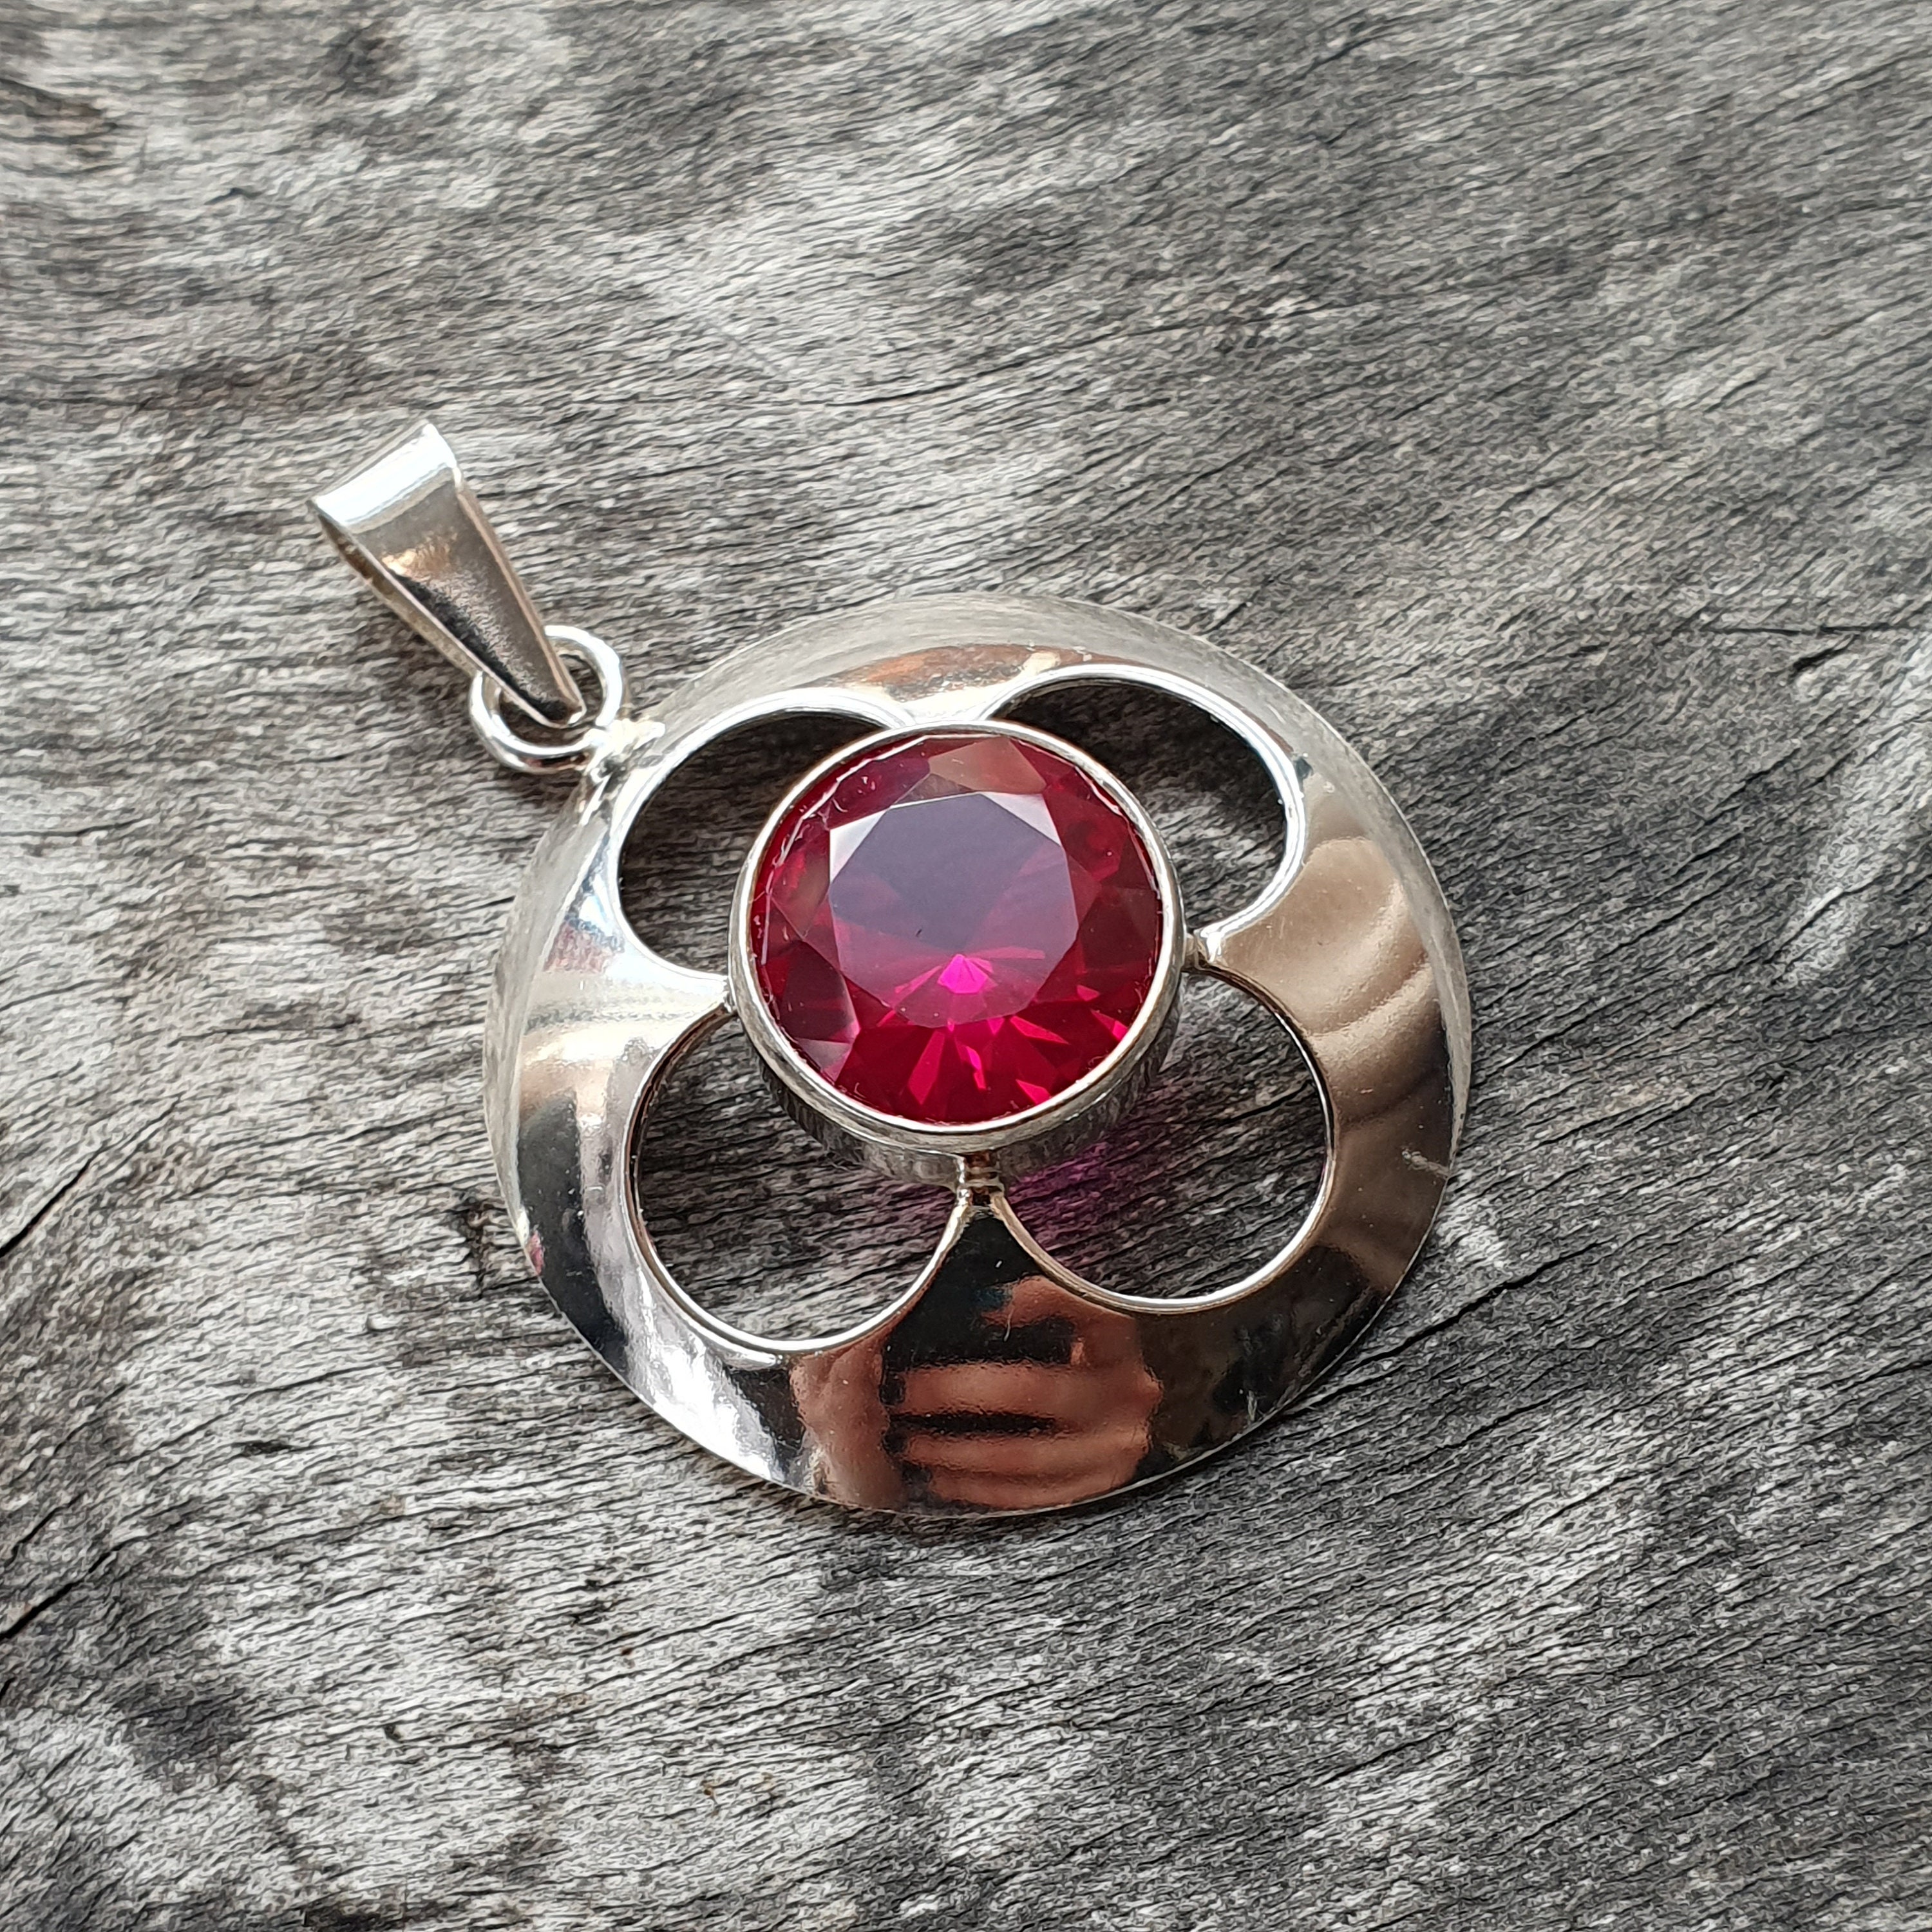 1970s Vintage Modernist Silver & Synthetic Ruby Necklace - Etsy 日本